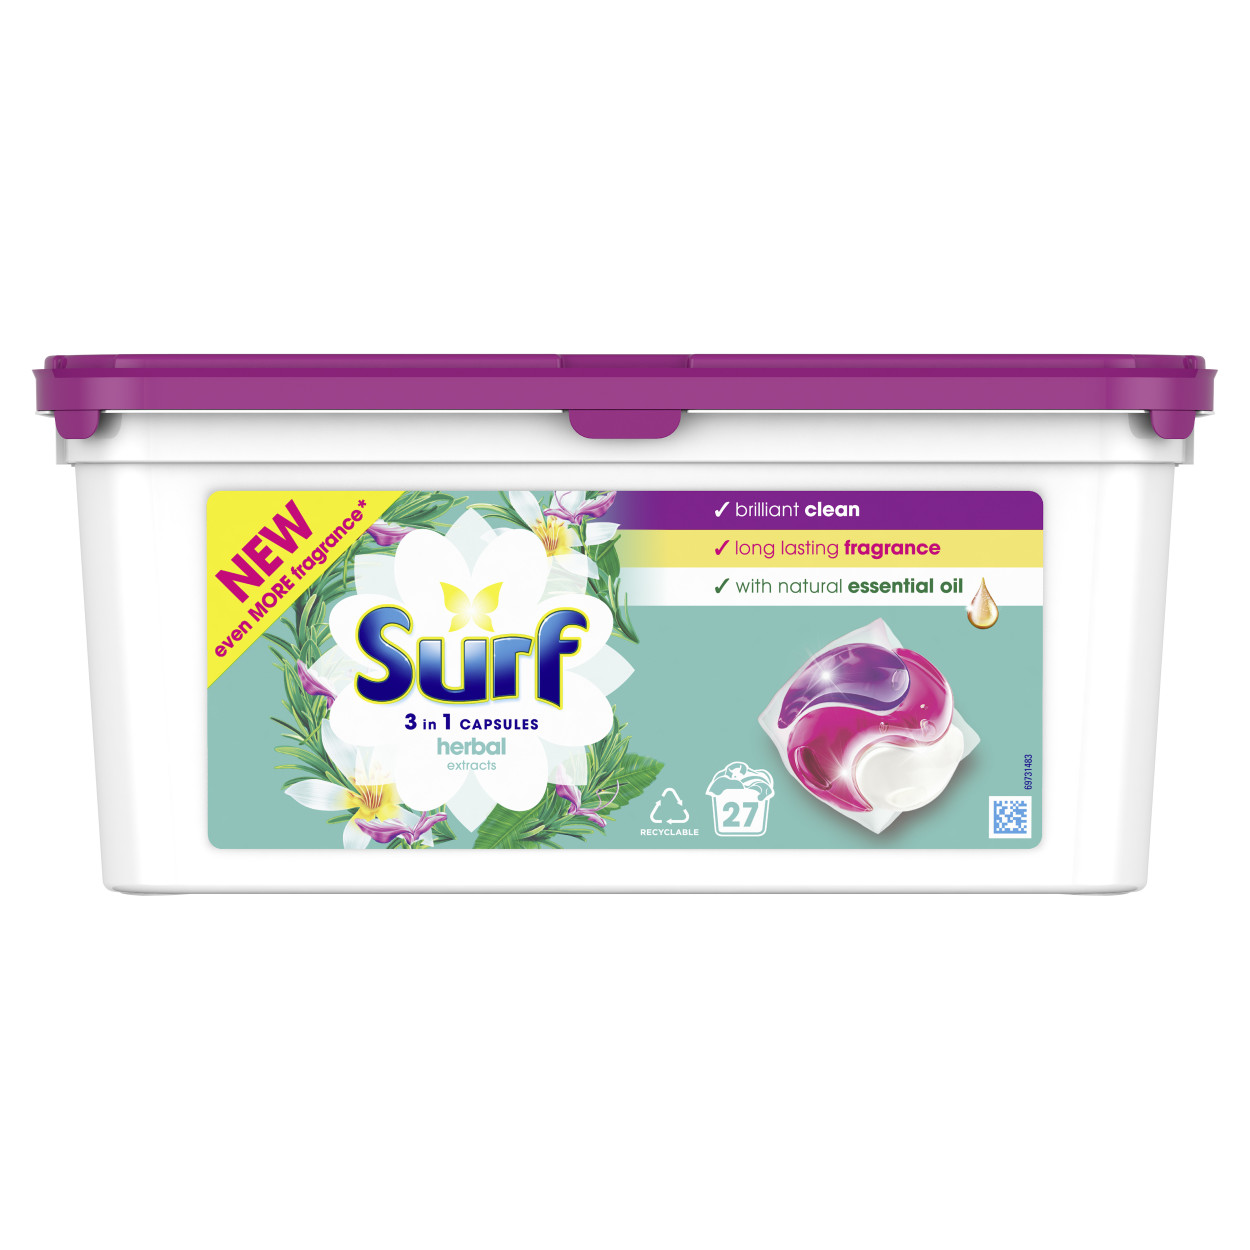 Surf 5 Herbal Extract Detergent Capsules